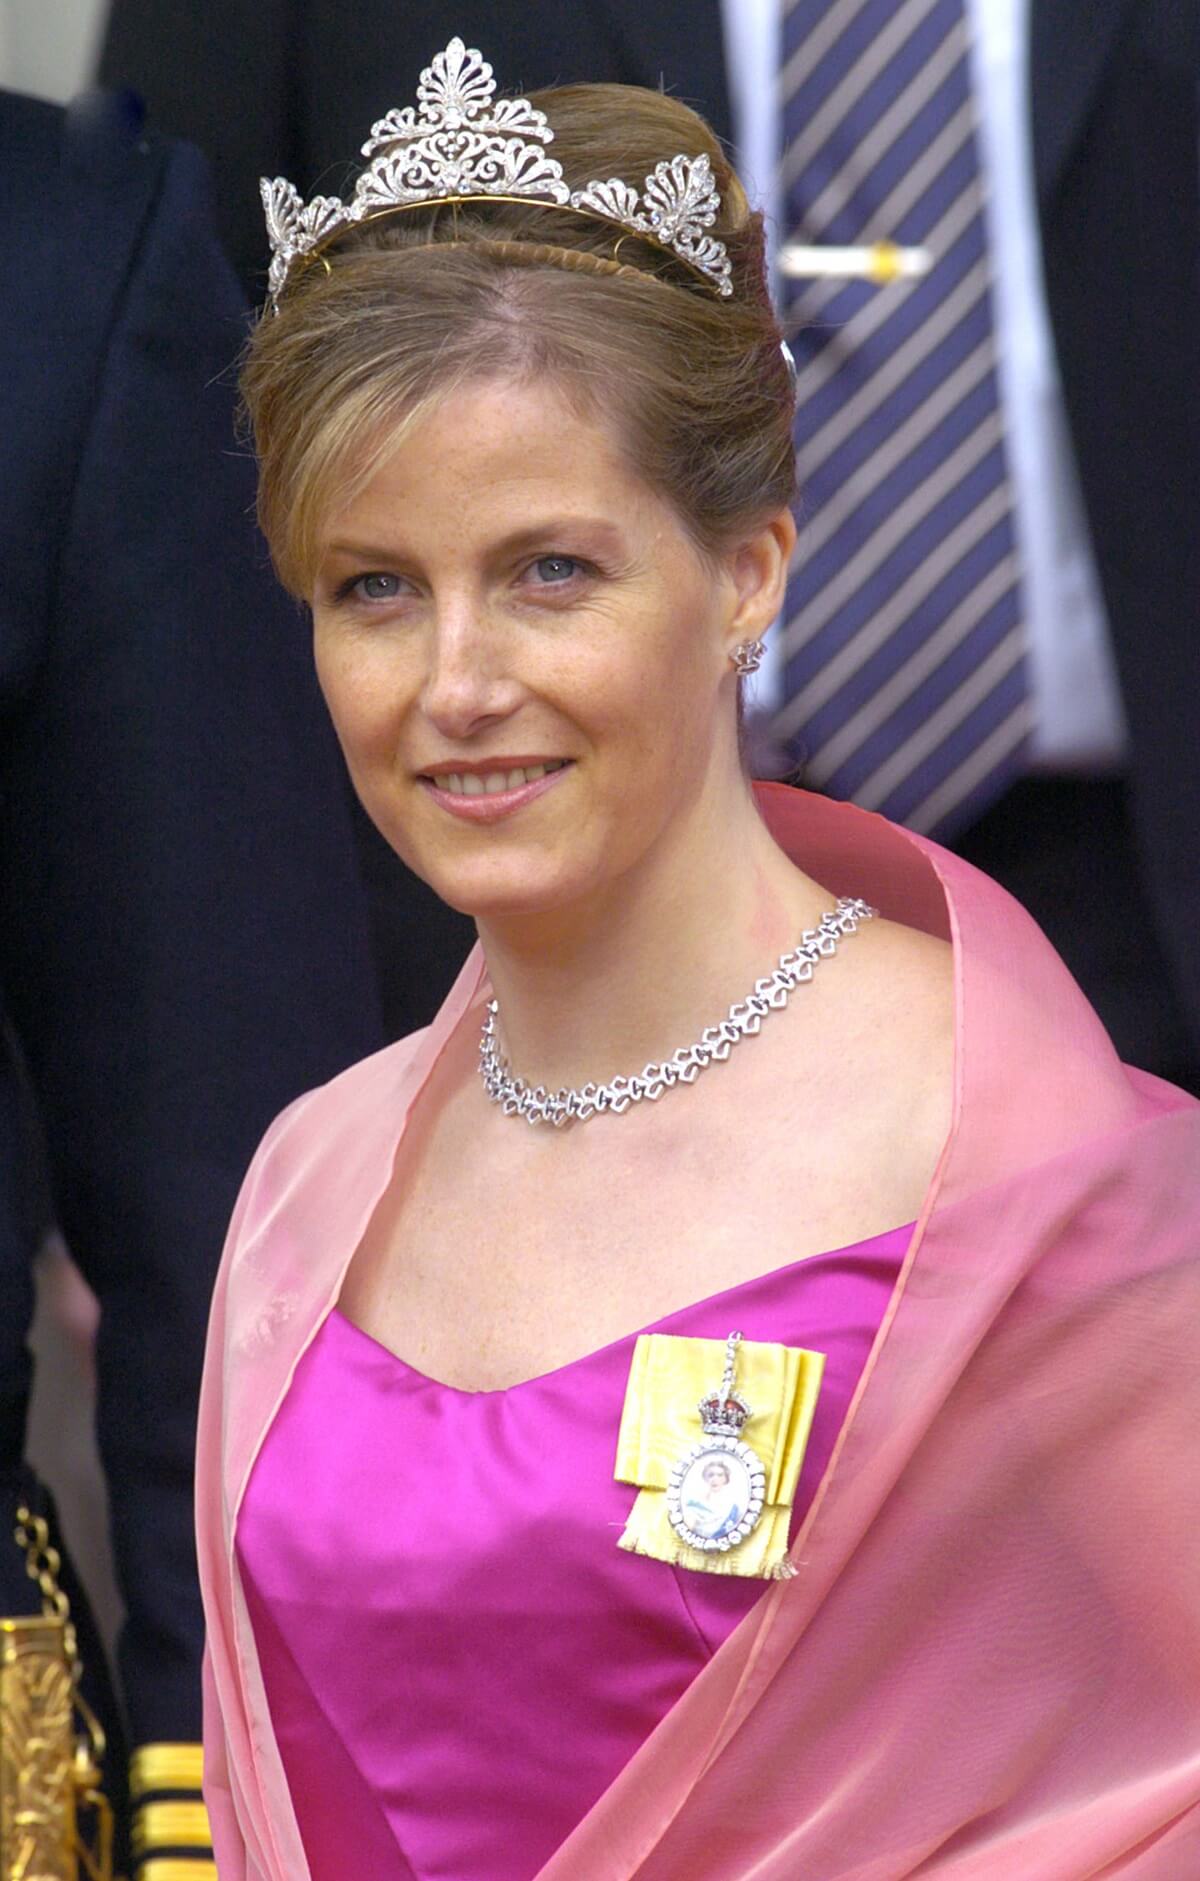 Sophie (then-the Countess of Wessex) pictured at the wedding of Crown Prince Frederik and Mary Donaldson in Copenhagen wearing the Anthemion Tiara